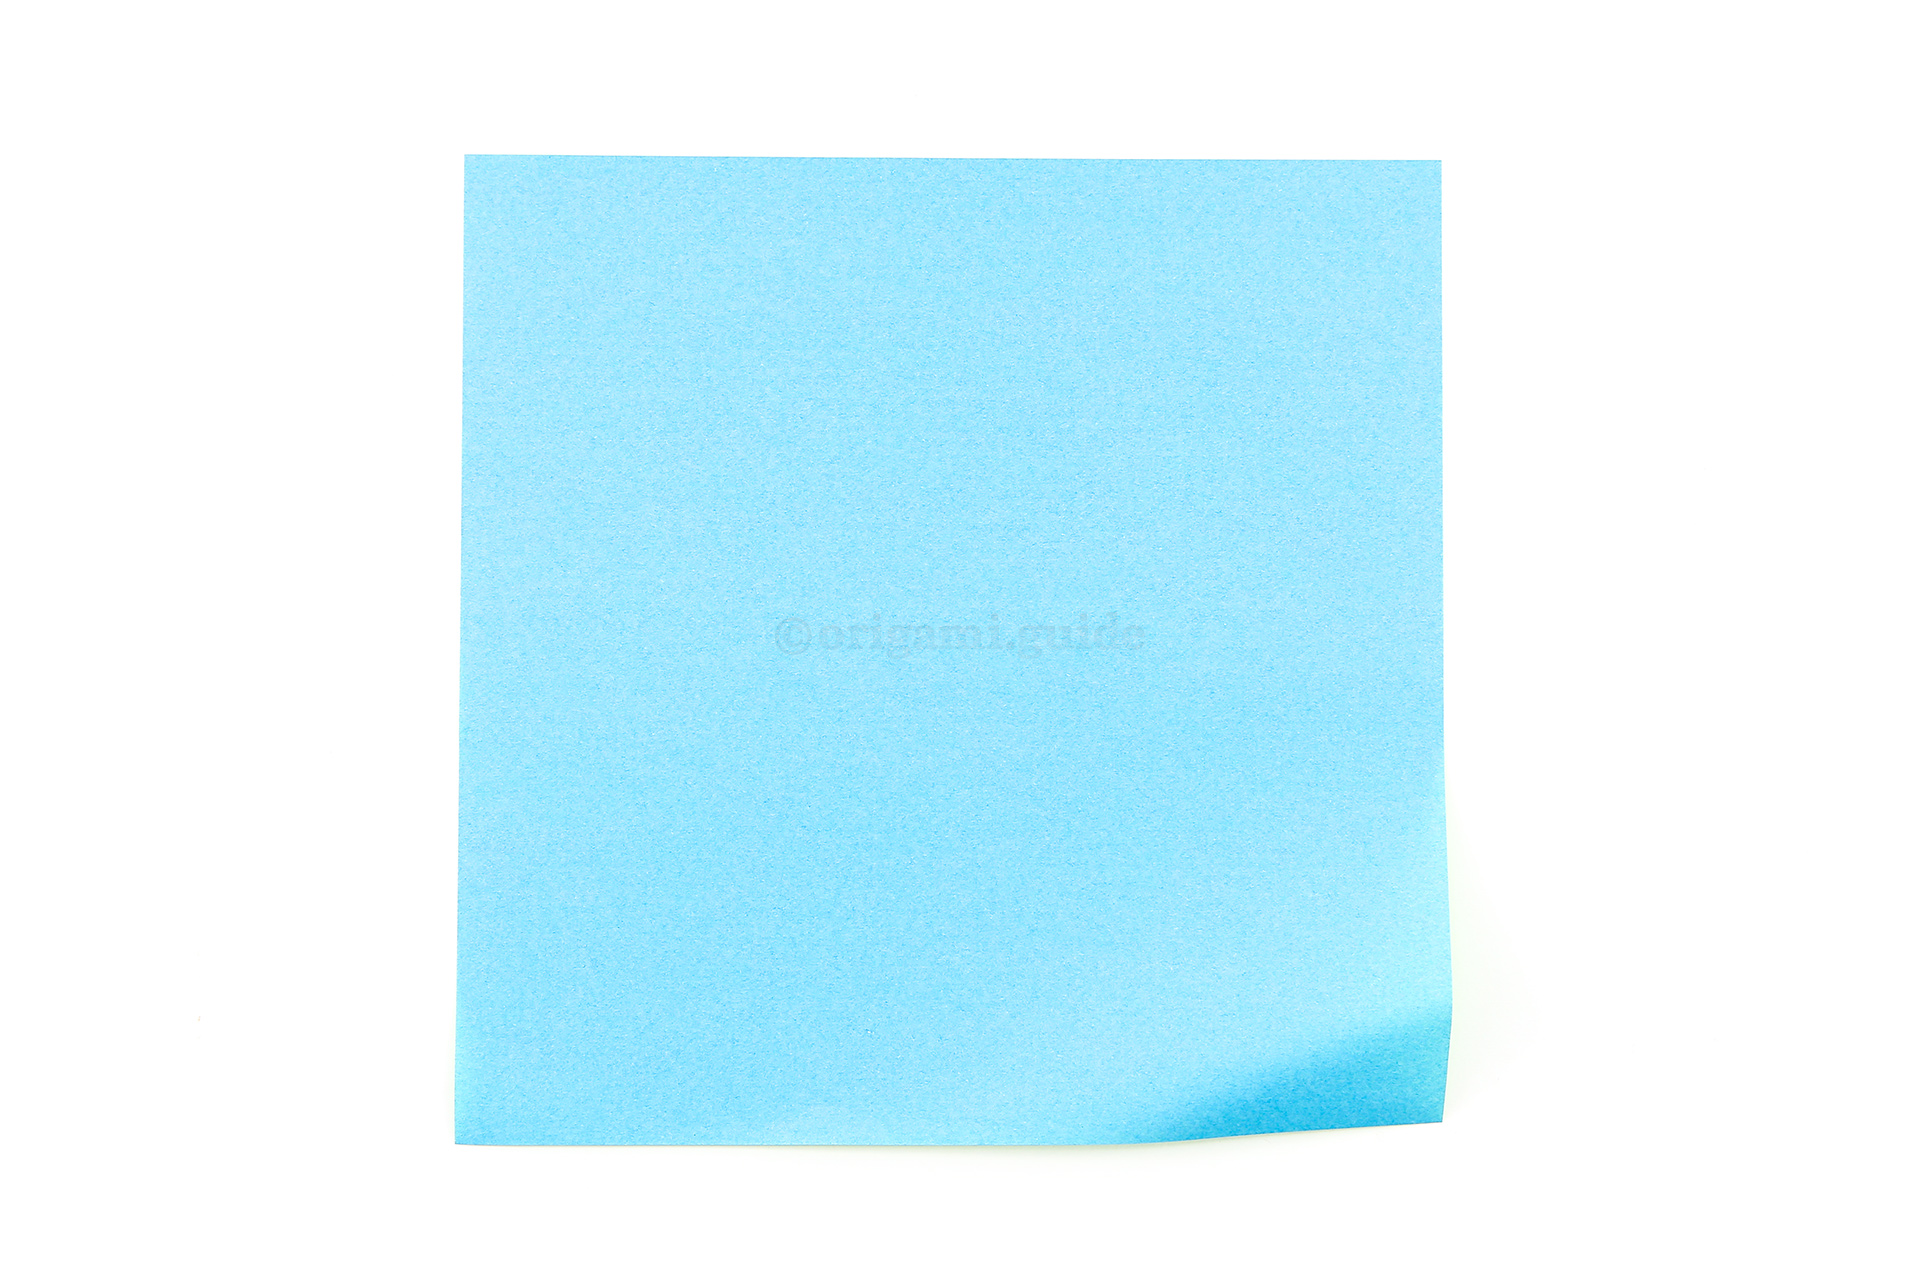 This is the front of our origami paper, the flower will end up being this colour on the front.